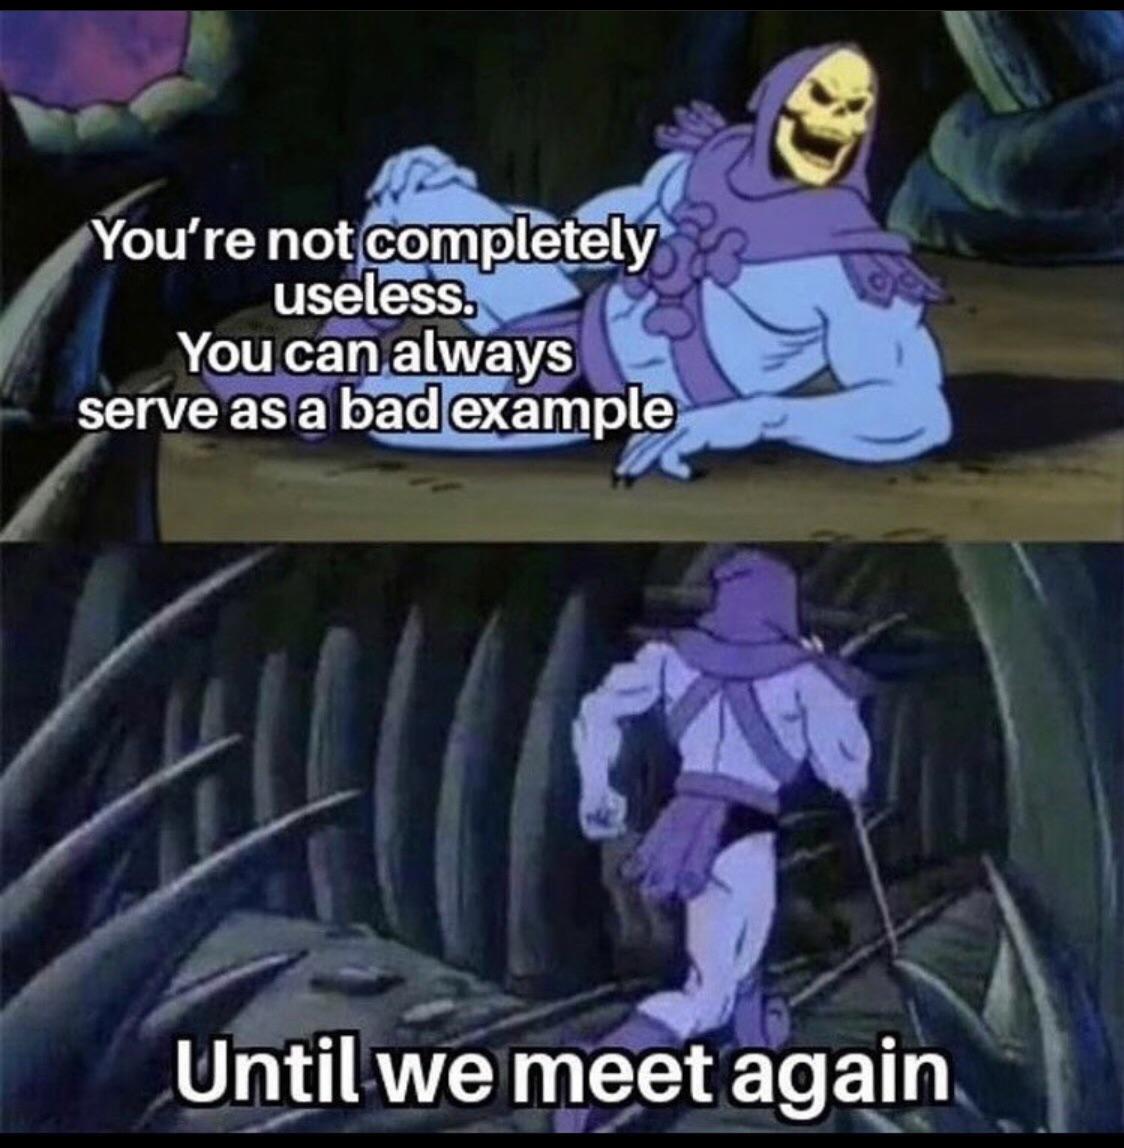 skeletor will be back meme - You're not completely useless. You can always serve as a bad example Until we meet again